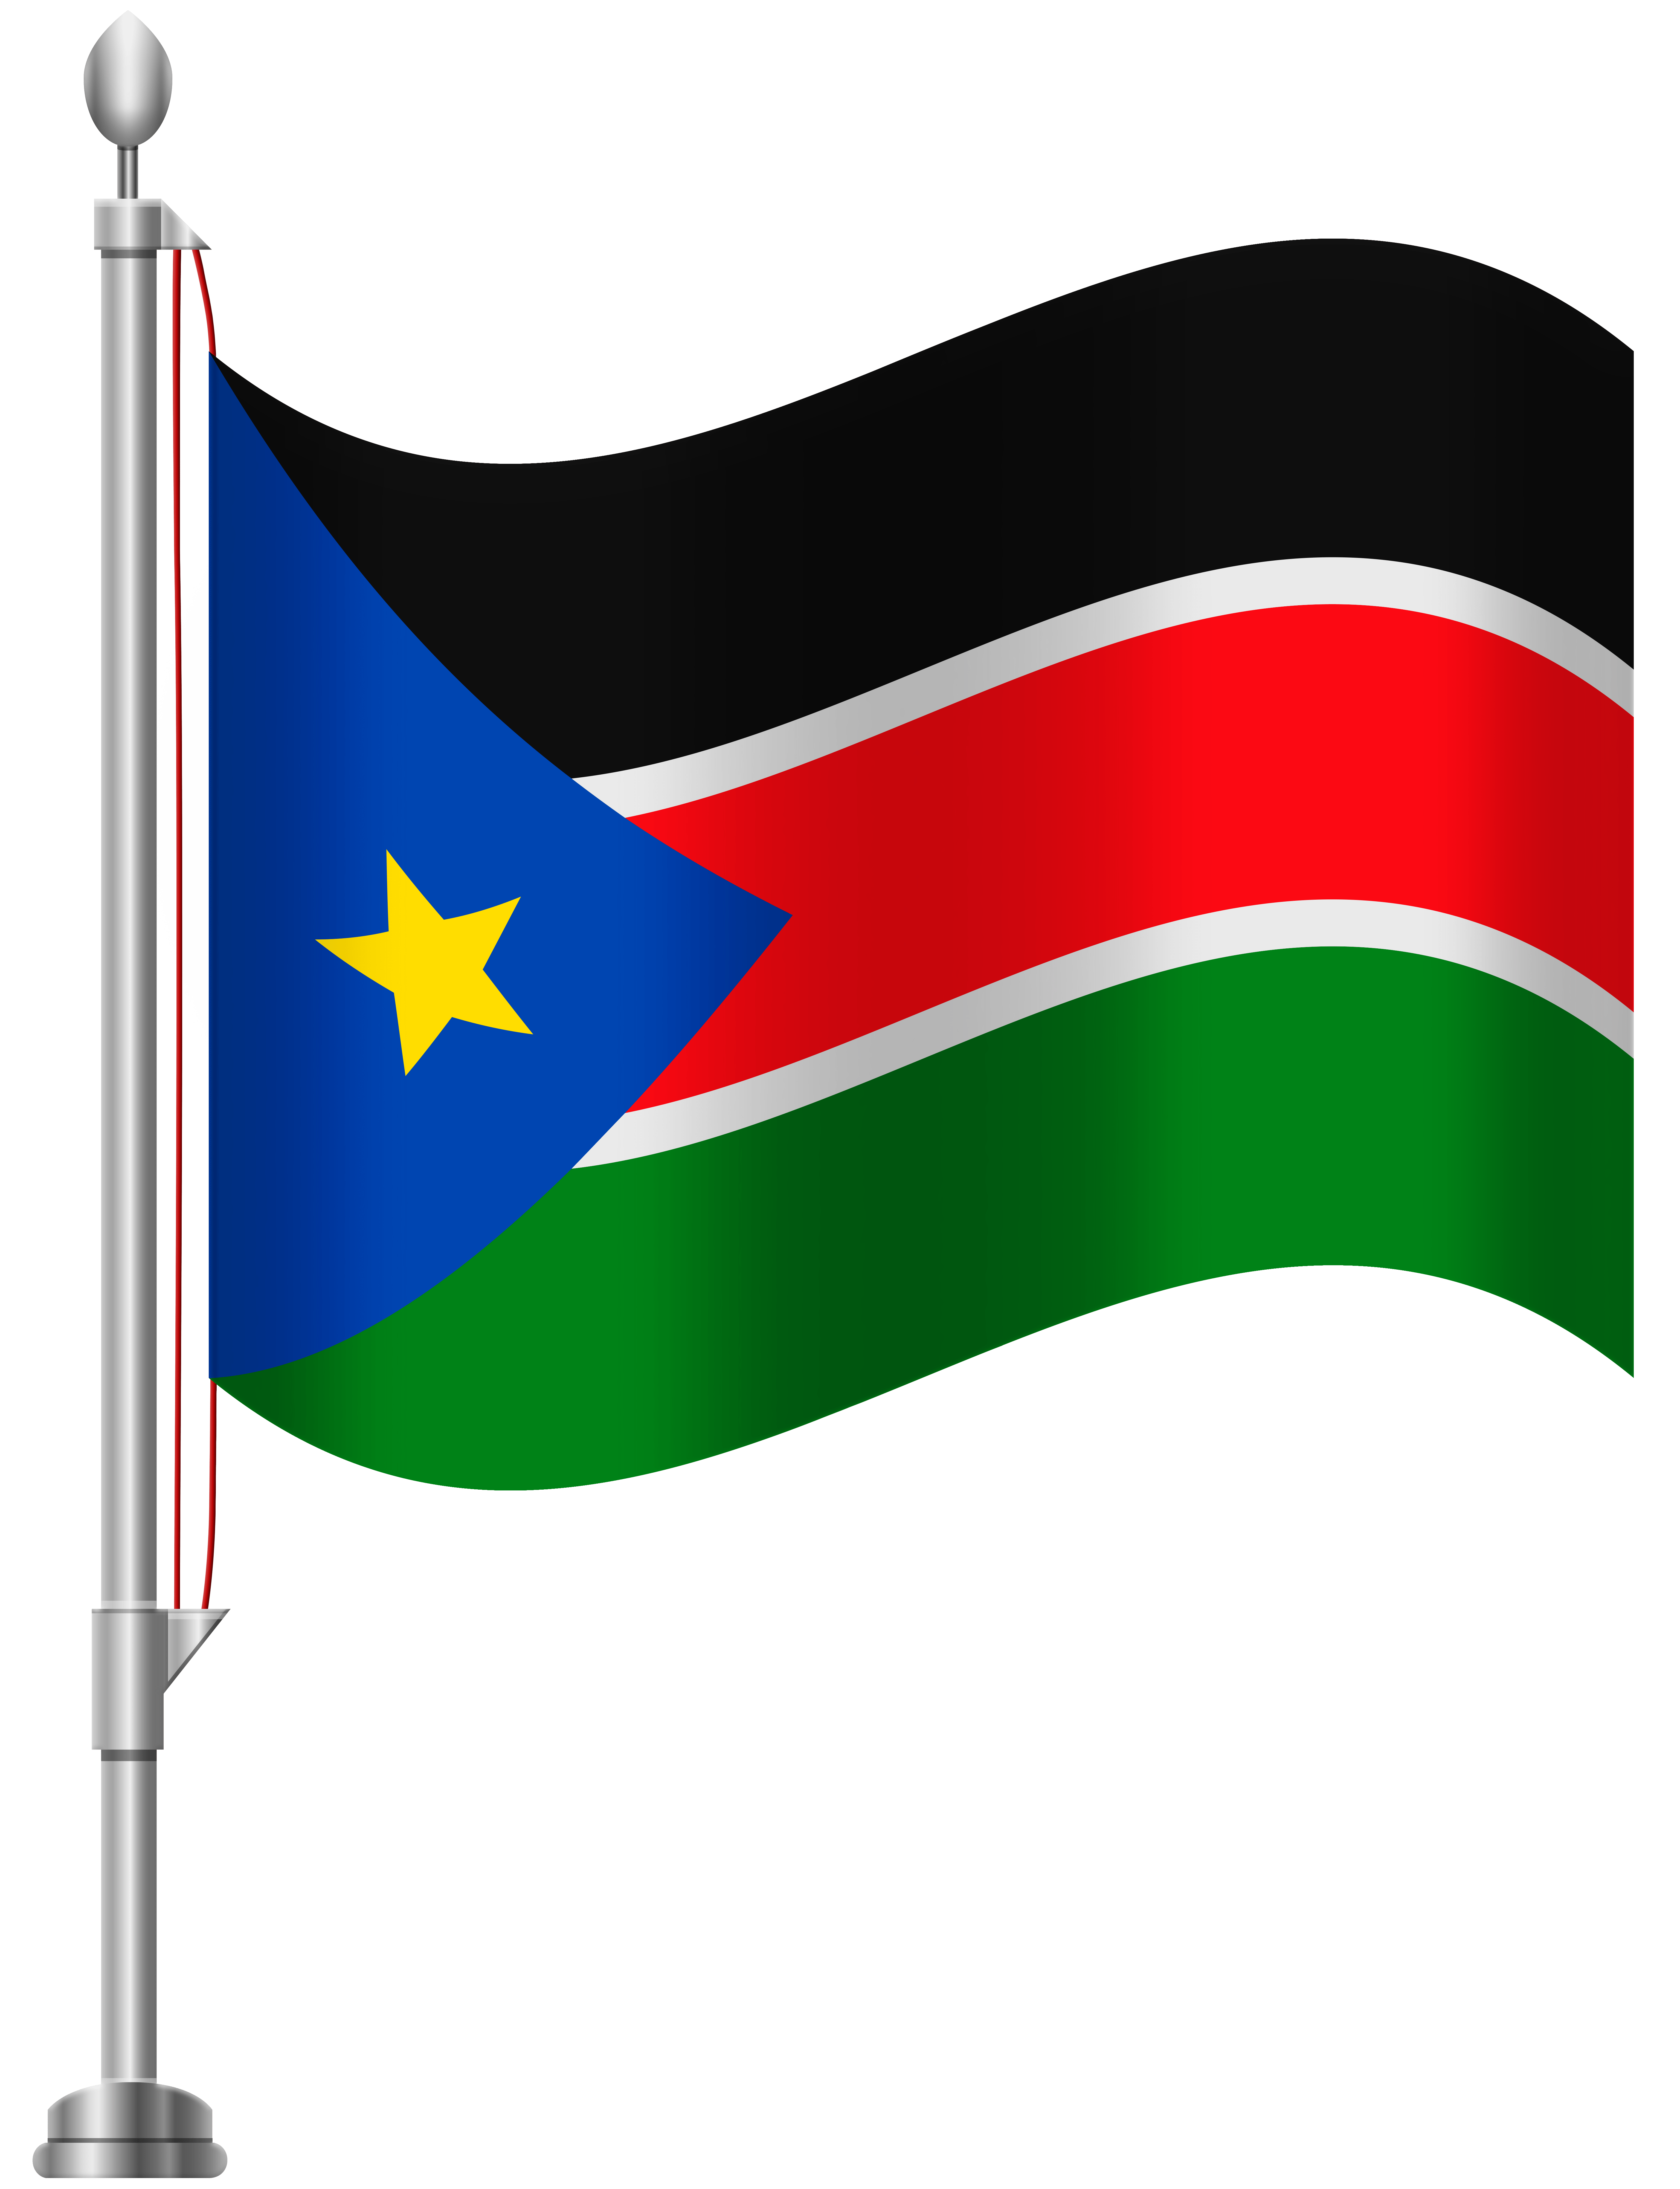 Flag Of South Sudan Image Picture Of Flag Imageco.Org